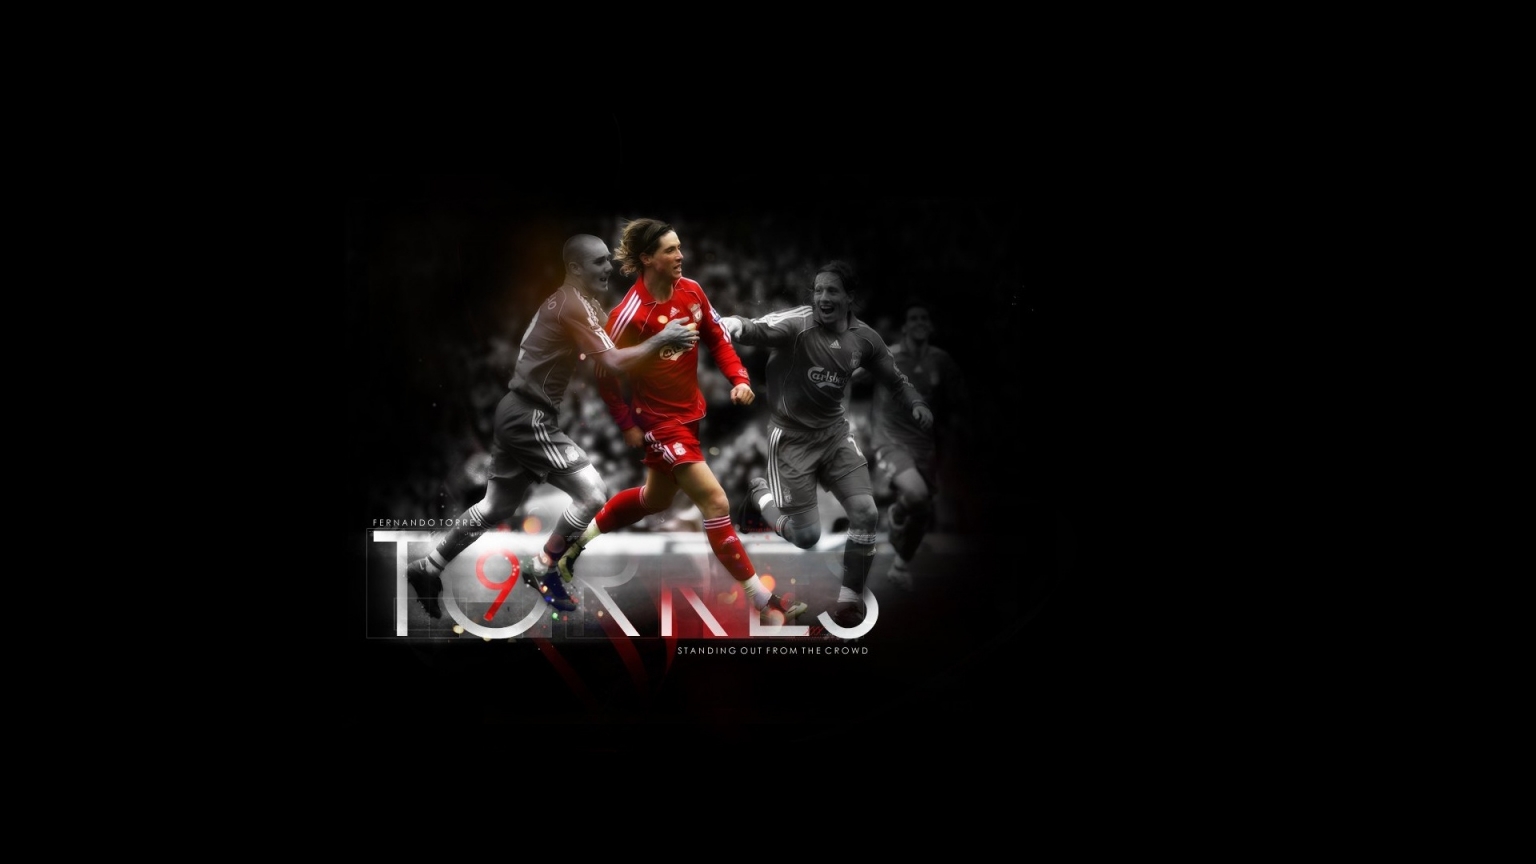 Fernando Torres playing for 1536 x 864 HDTV resolution